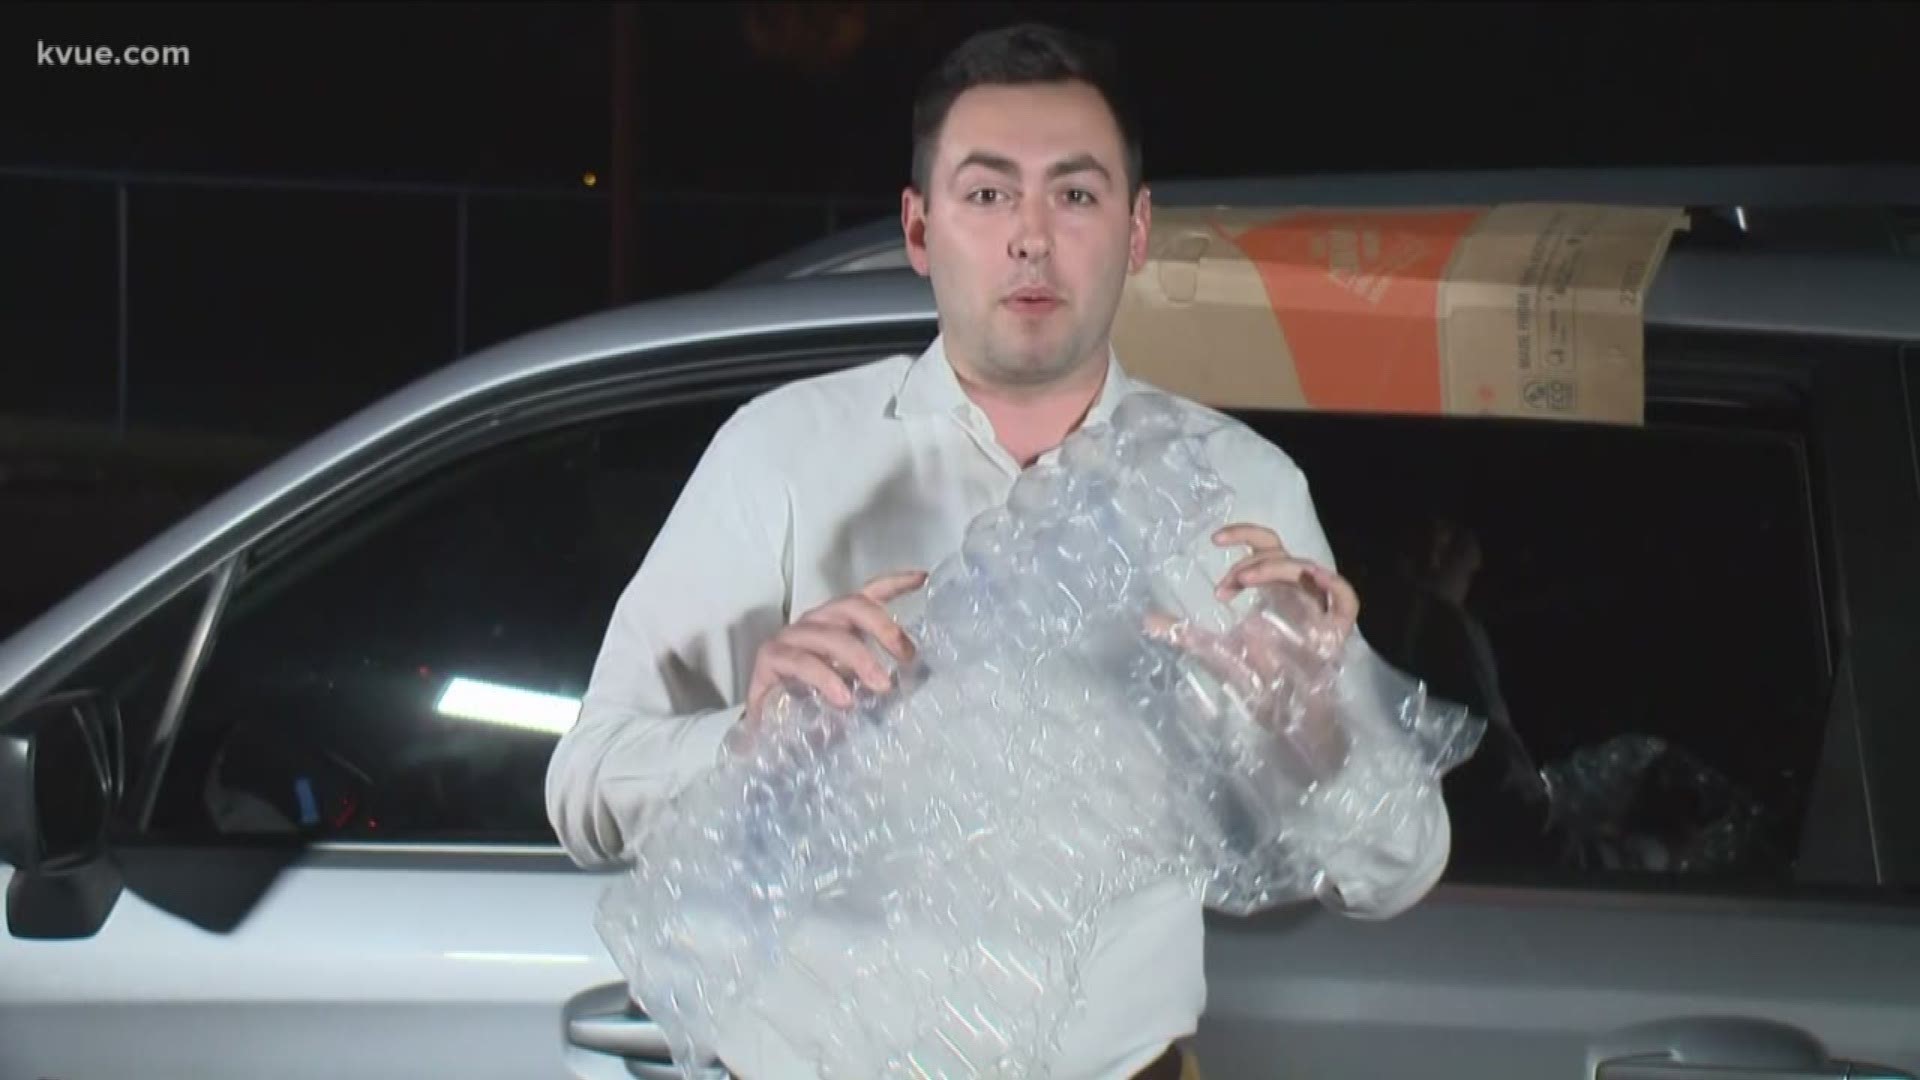 KVUE visited auto shops to find out how best to protect your car from hail.